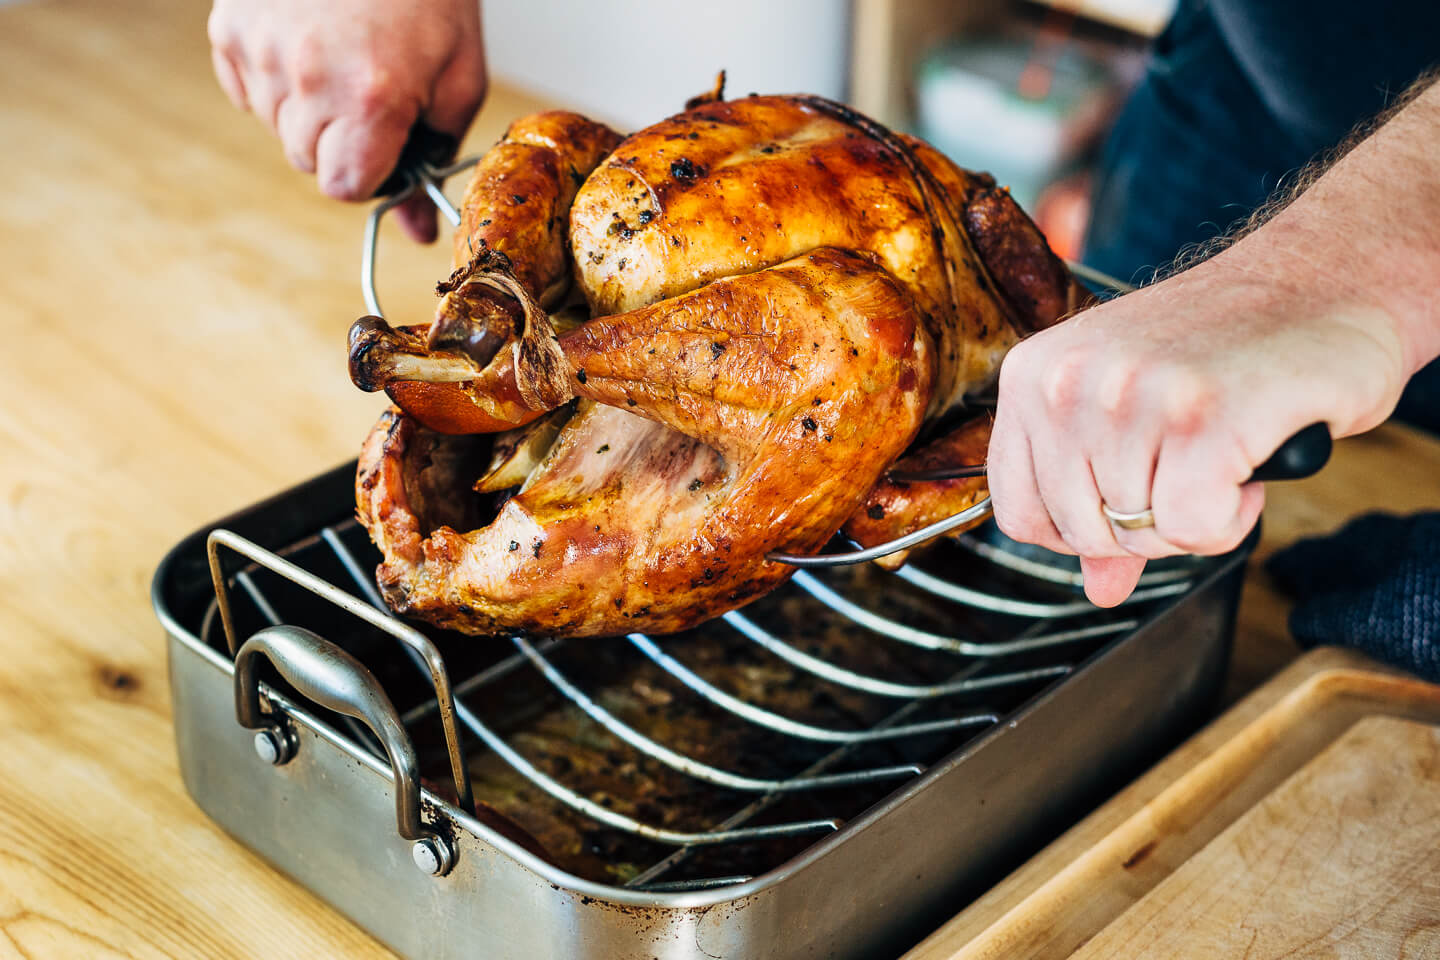 Pointy-tipped turkey and roast lifters make sure the hot bird is secured while you’re moving it.